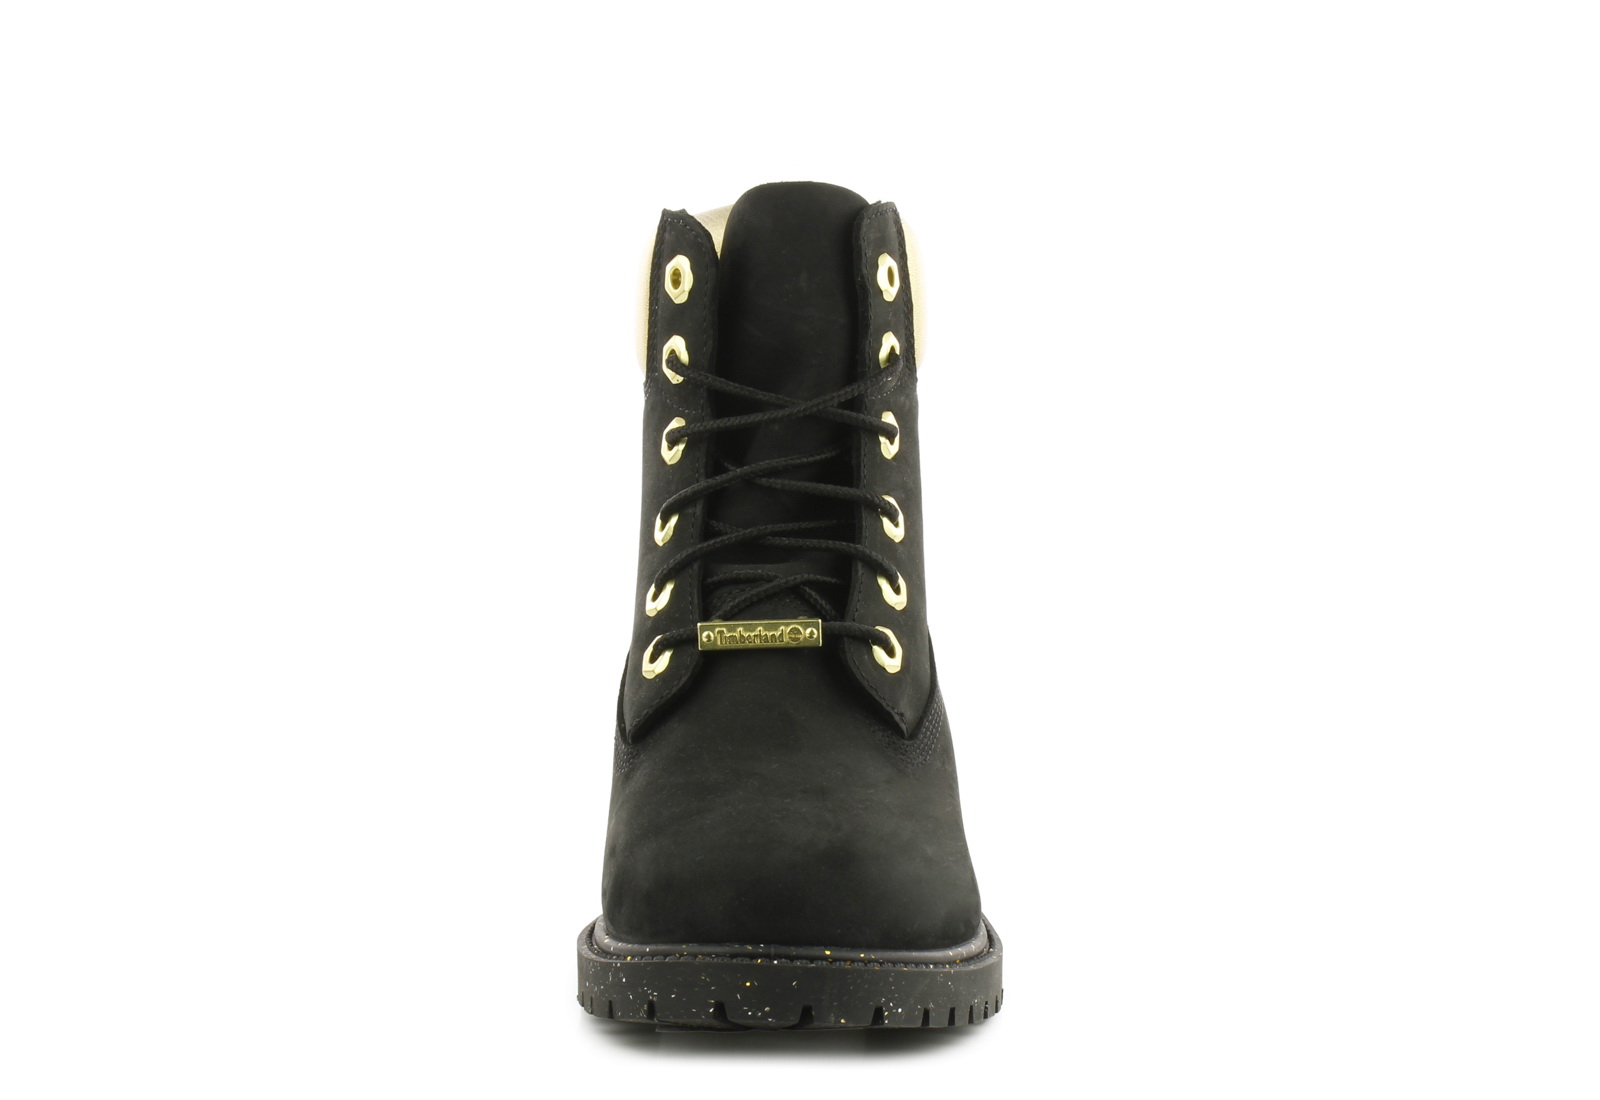 Timberland Topánky 6 In Prem Boot